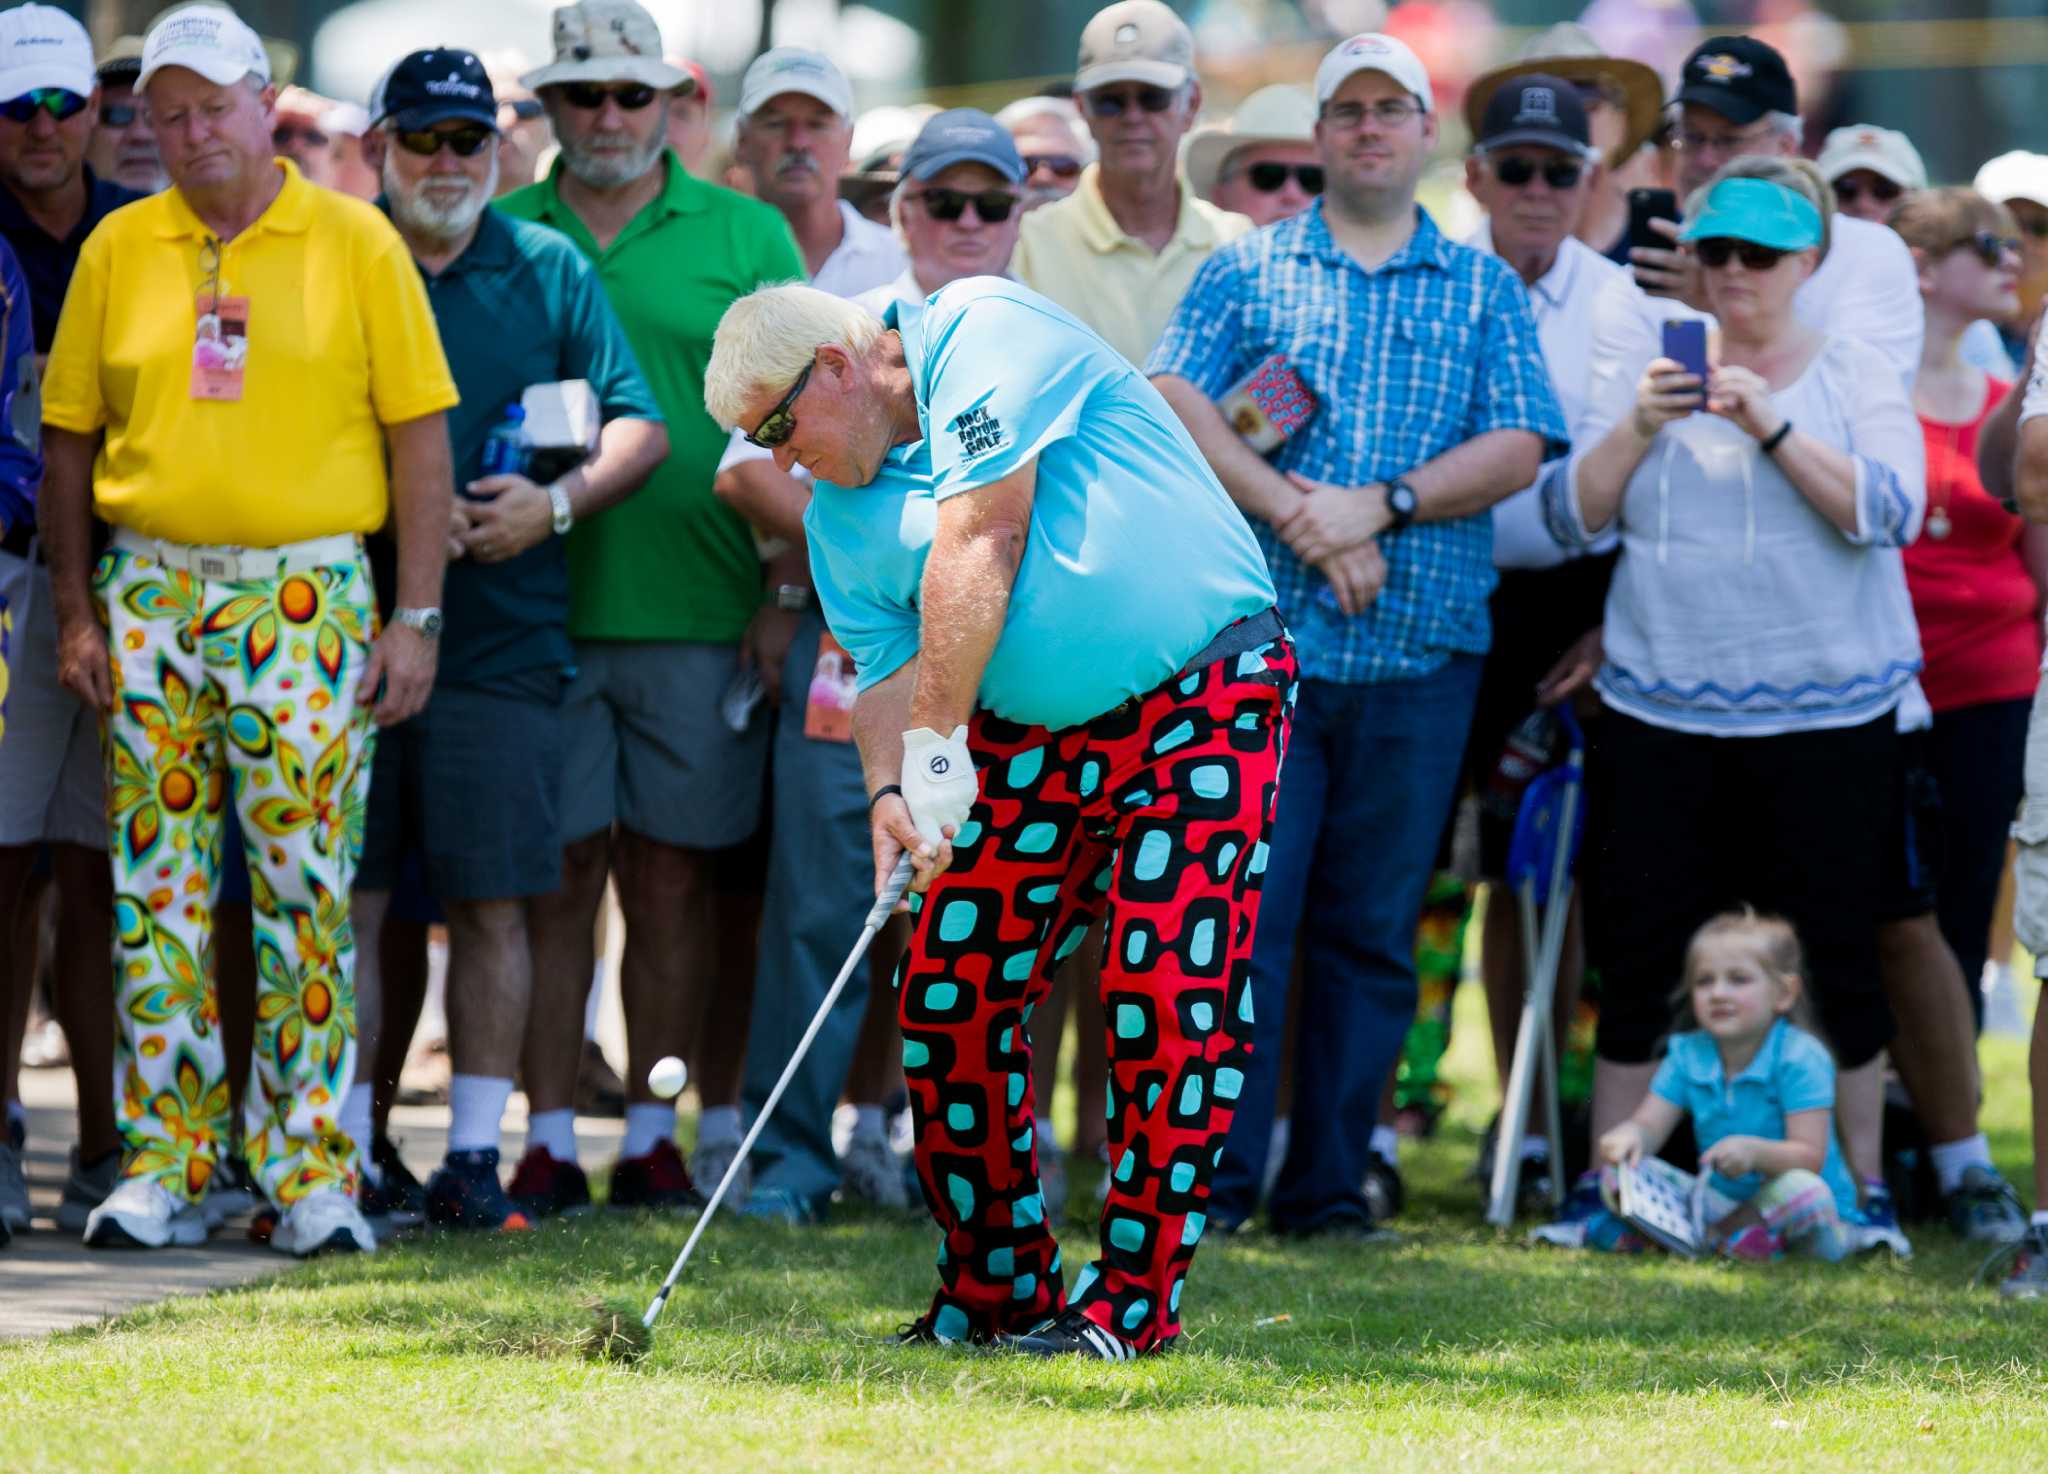 John Daly's Loudmouth Pants highlight his Champions' debut